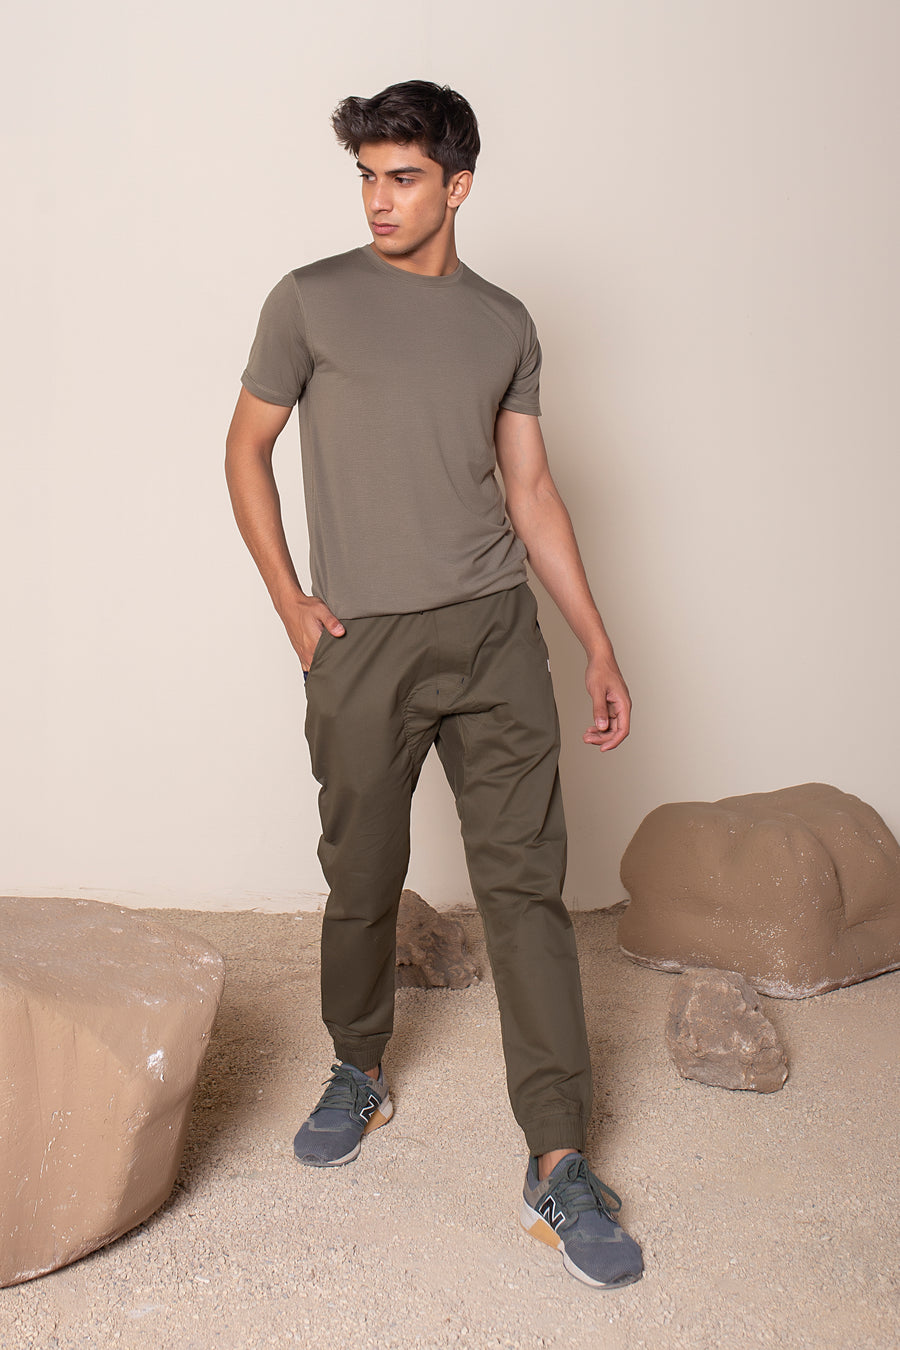 Men's Earth Joggers Olive Green | VOLO Apparel | Designed for you to rock climb, hike, yoga, run or just chill. The most versatile athletic joggers that are fitted for your every daily life and all your athletic endeavors. The Earth Joggers comes with five pockets, features a 3 point gusset, 2 zipper pockets, snap buttons, tapered bottoms, and a breathable stretchy spandex cotton twill. With an internal drawstring and a tailored fit, these are gonna be your go to adventure joggers.